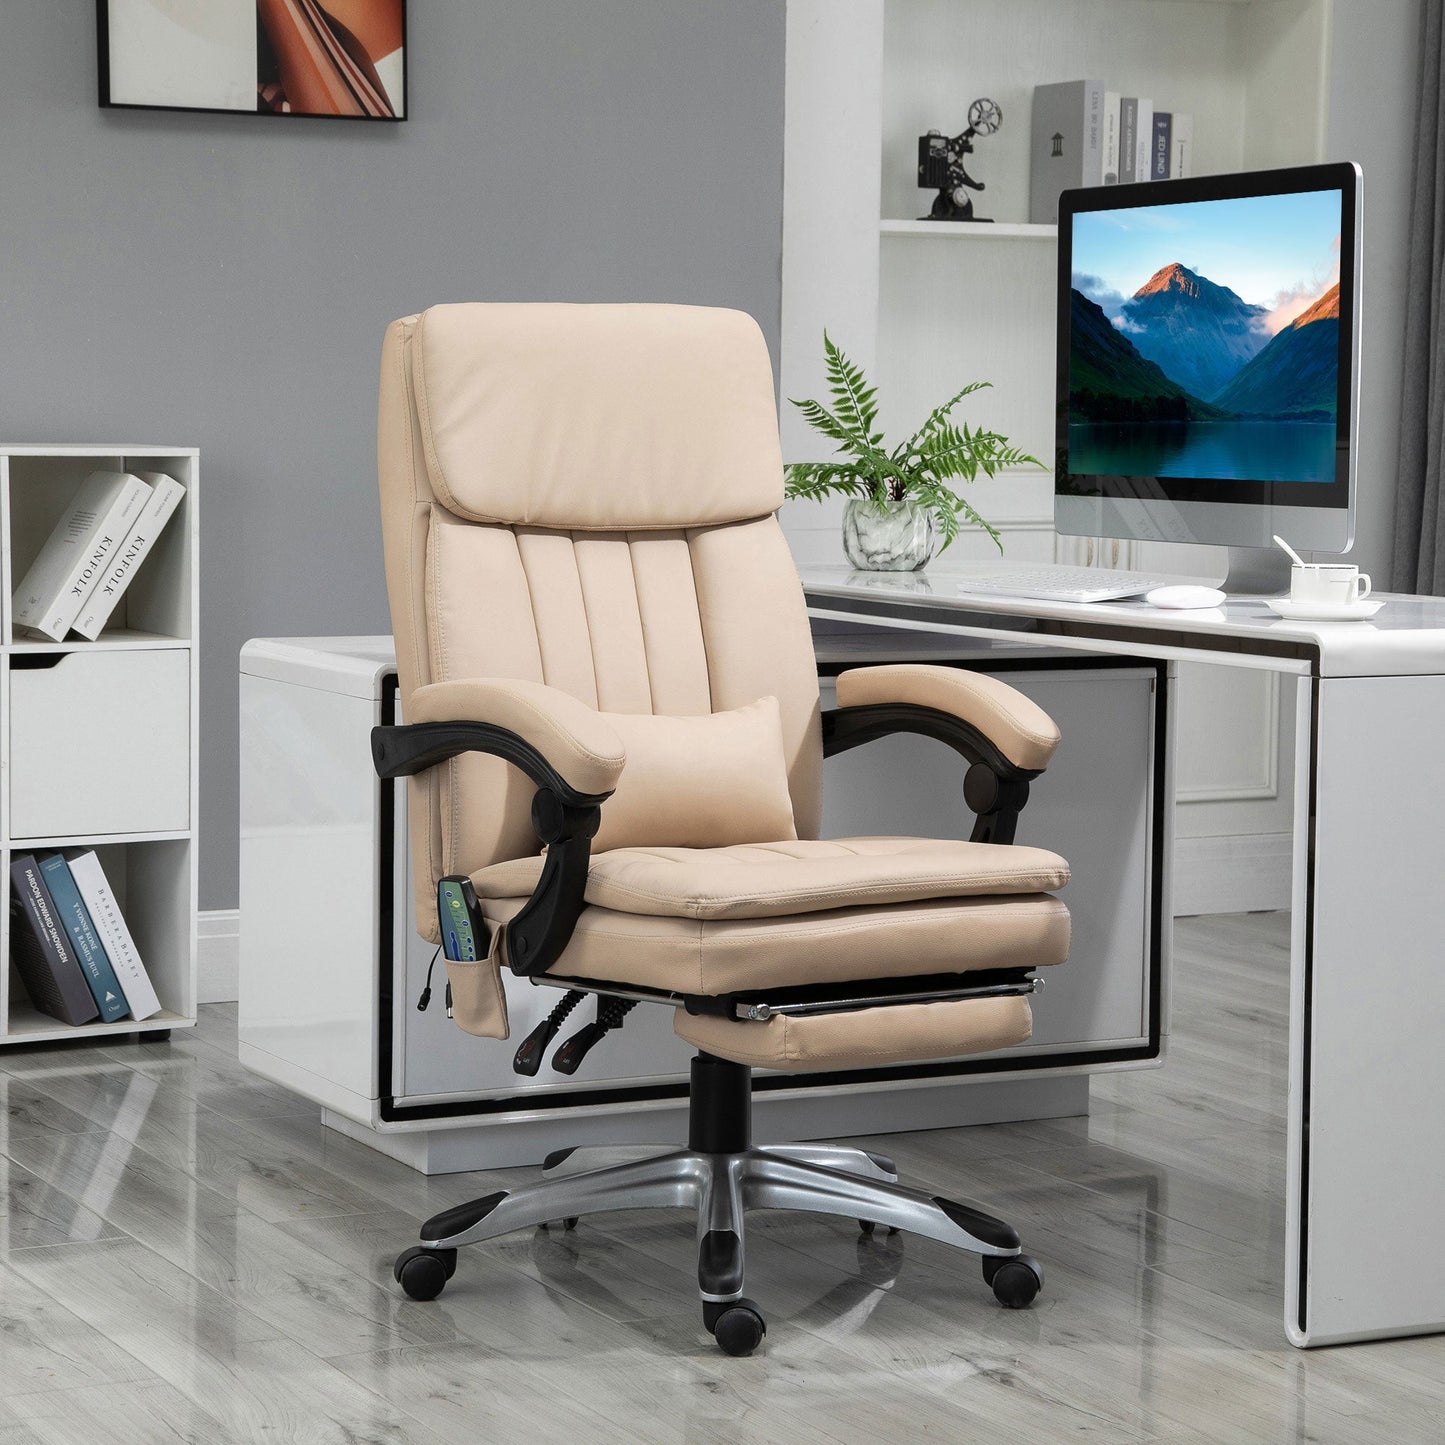 Vacket massive armchair from office, adjustable and reclining height in the like, 67x69x106.5-114.5cm Beige